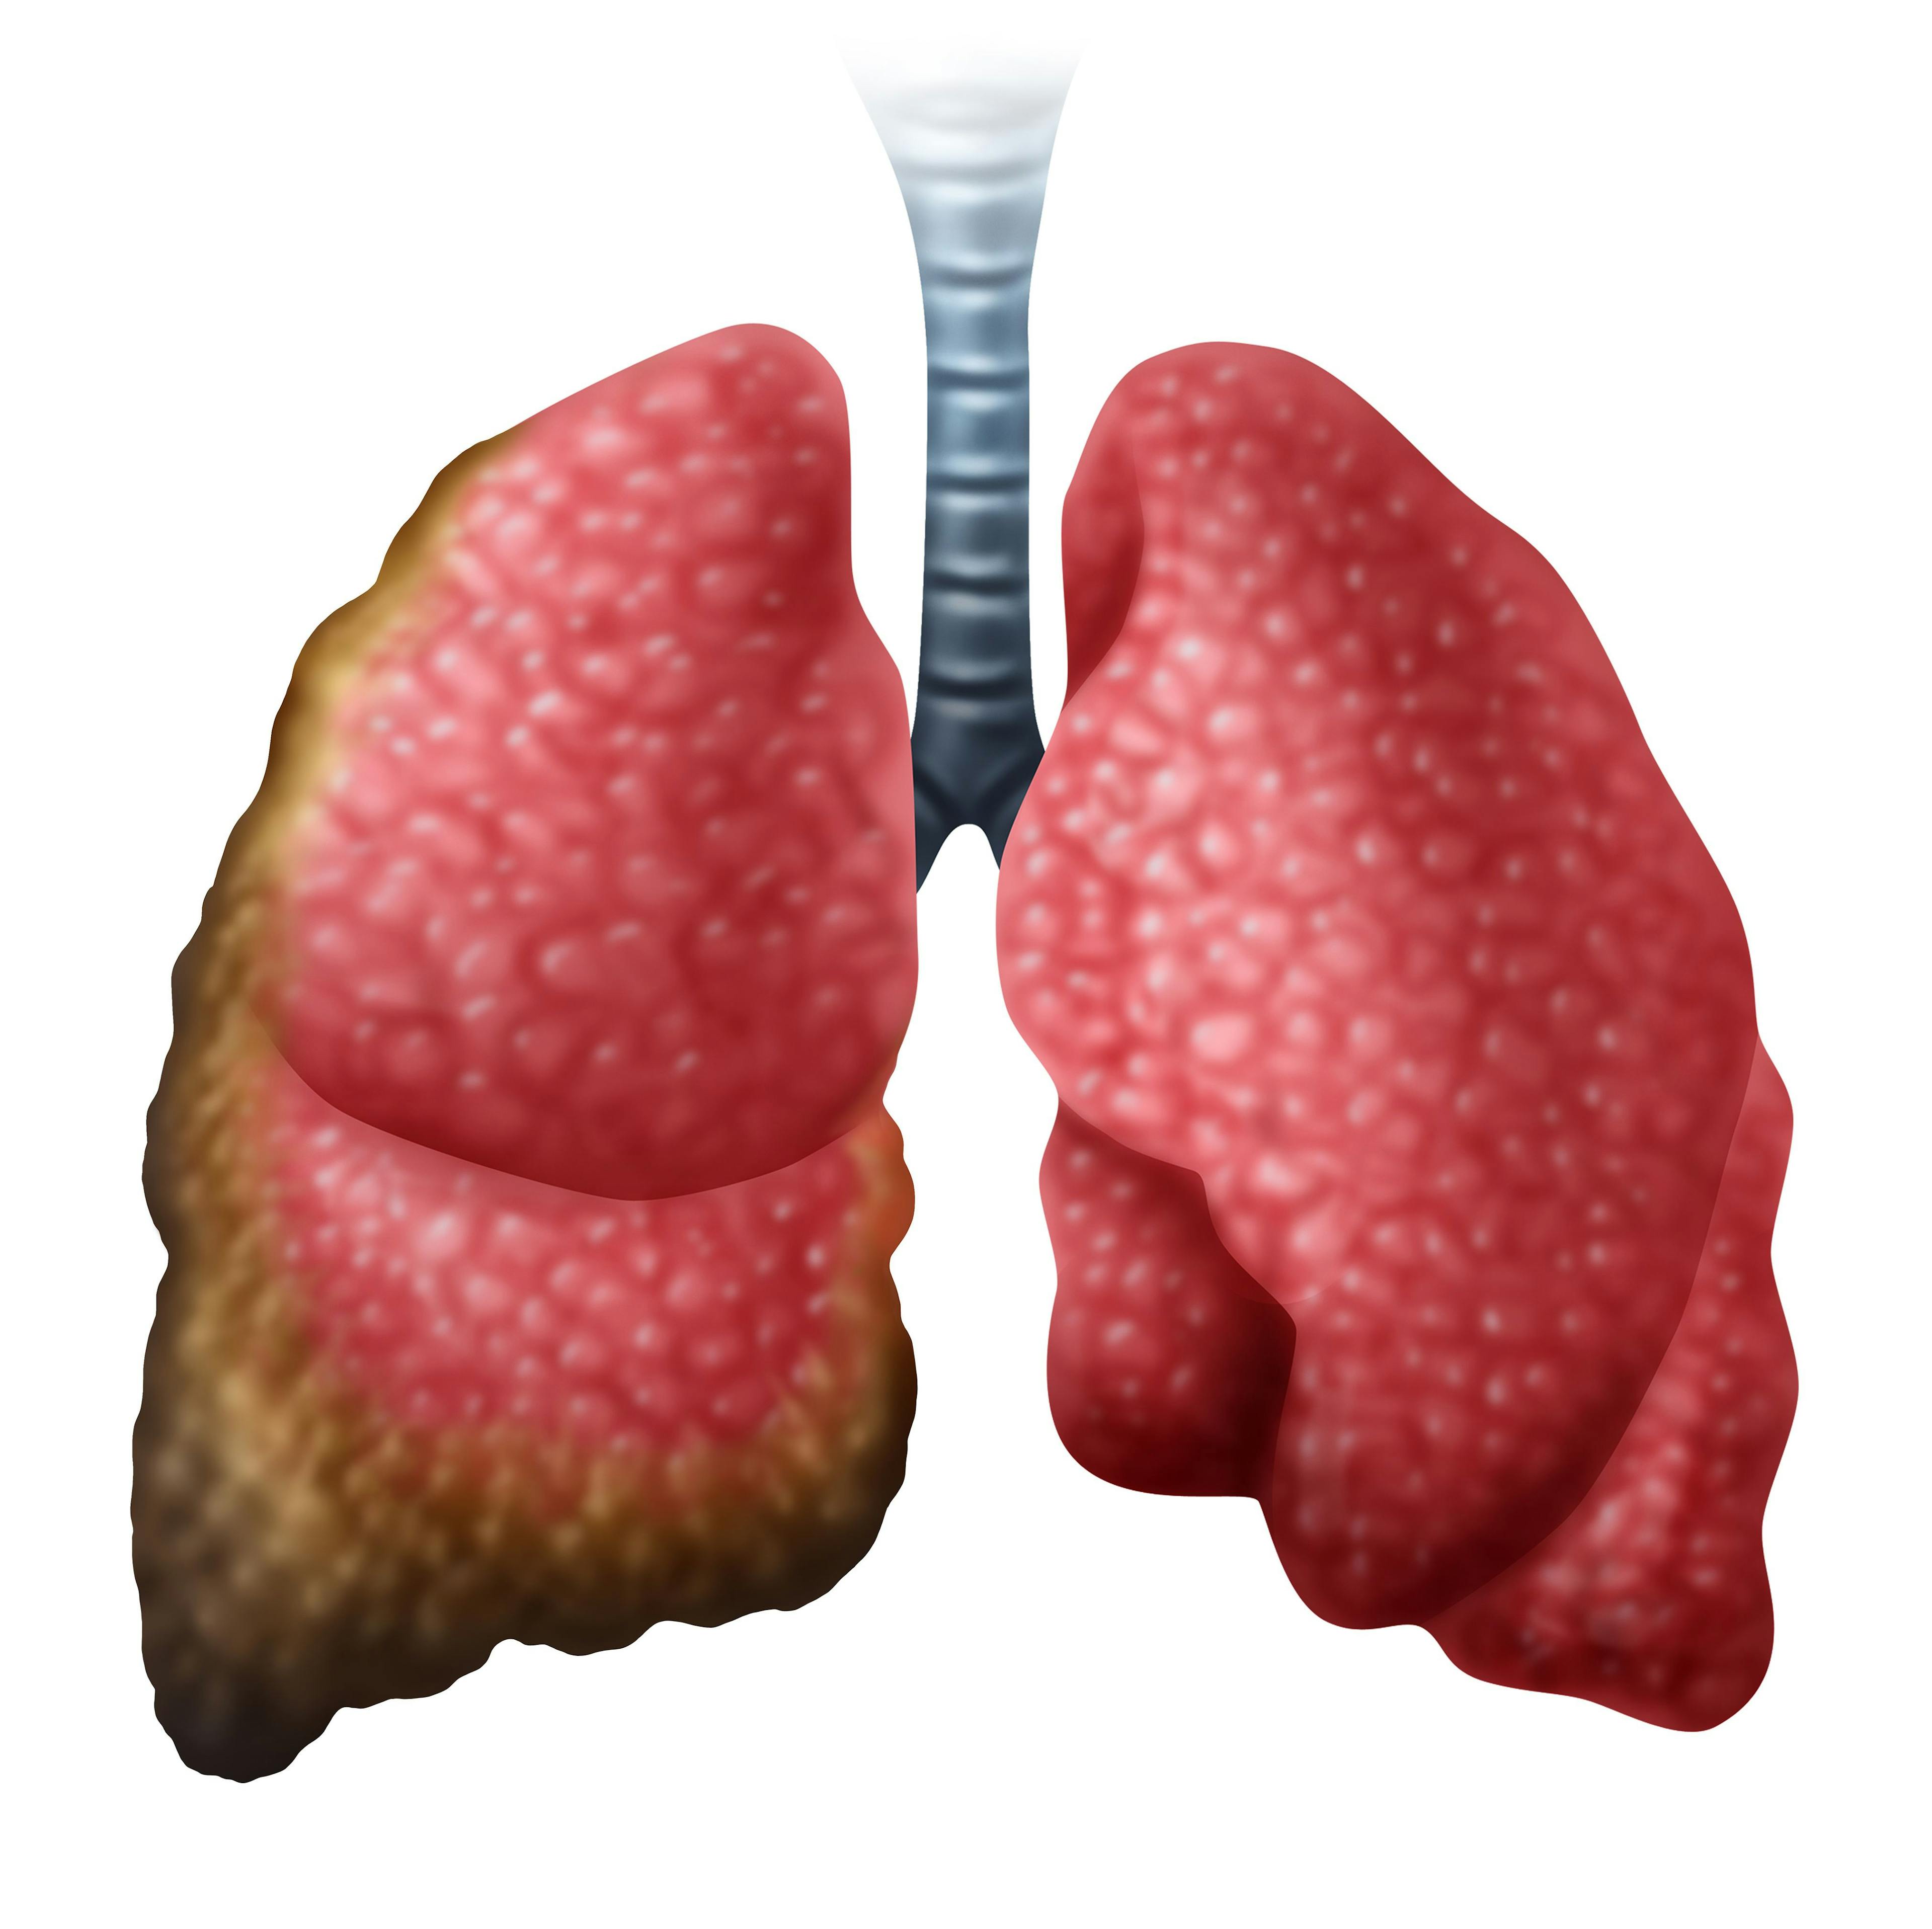 First-Line Selpercatinib Shows PFS Benefit in RET+ NSCLC